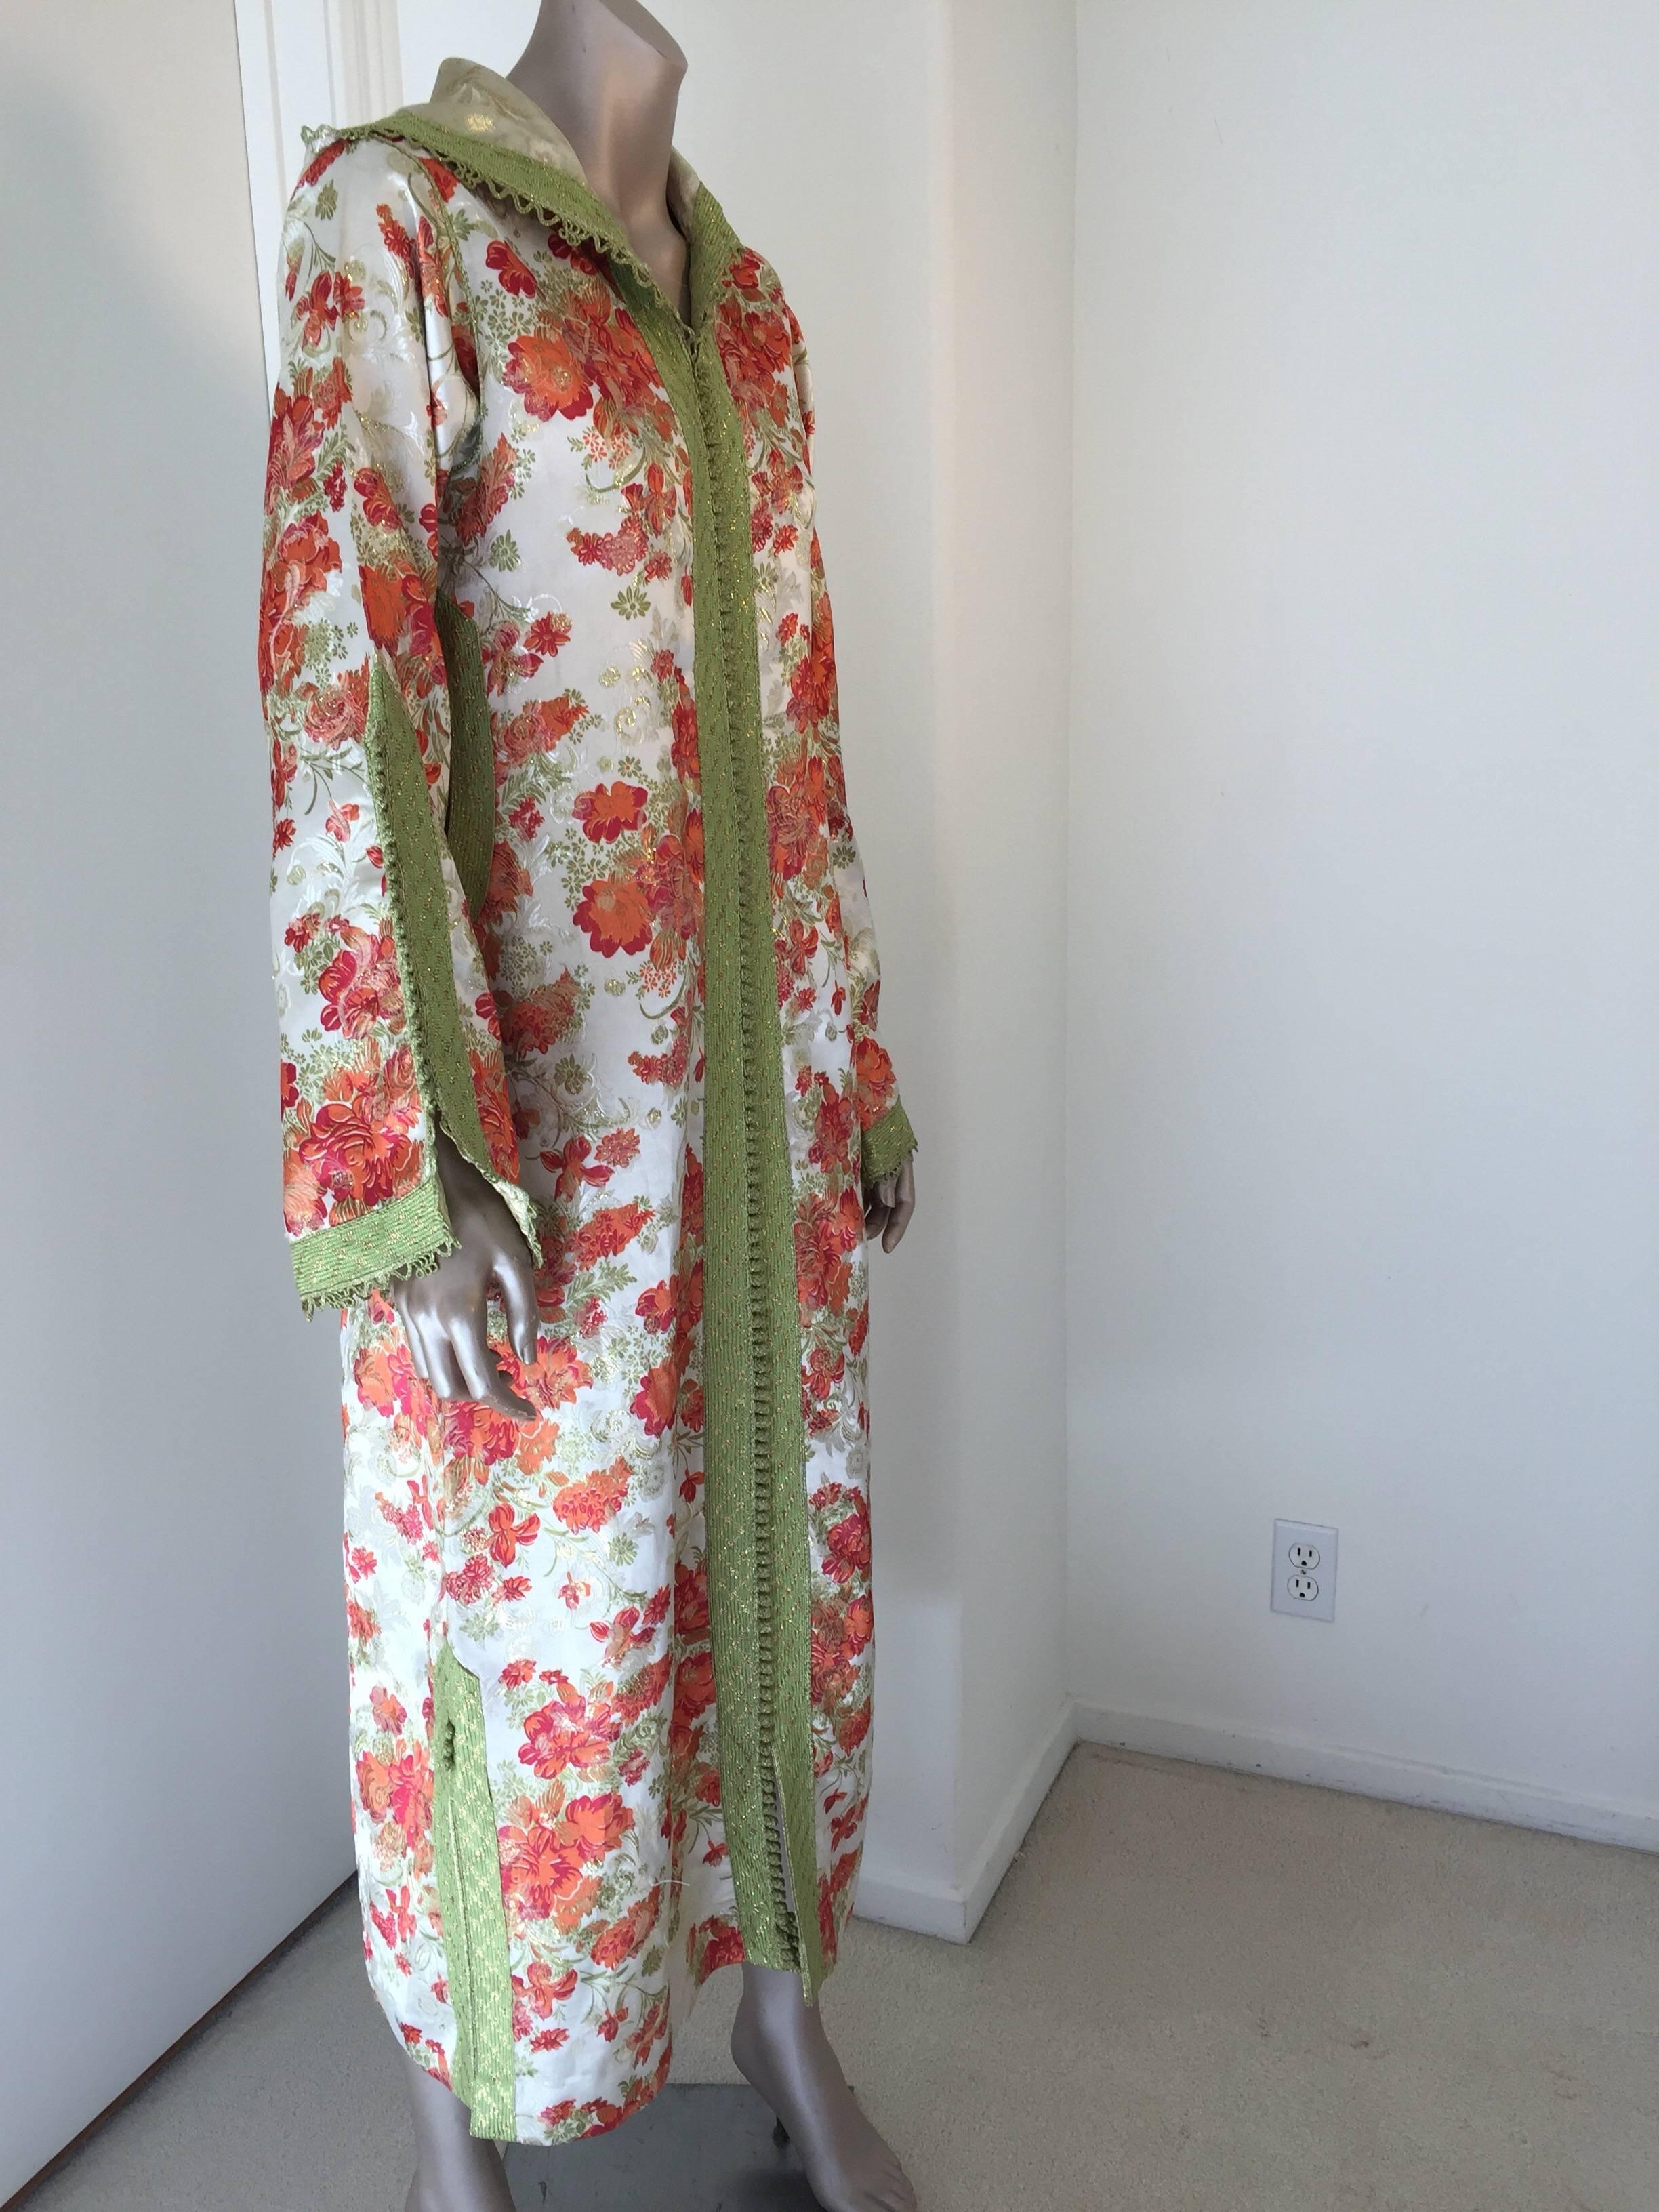 Elegant vintage designer Moroccan kaftan, hooded caftan white with red and gold flowers and embroidered with green woven braided buttons and loops.
This chic Gypsy Bohemian multi-color maxi dress hooded kaftan is embellished with green woven buttons